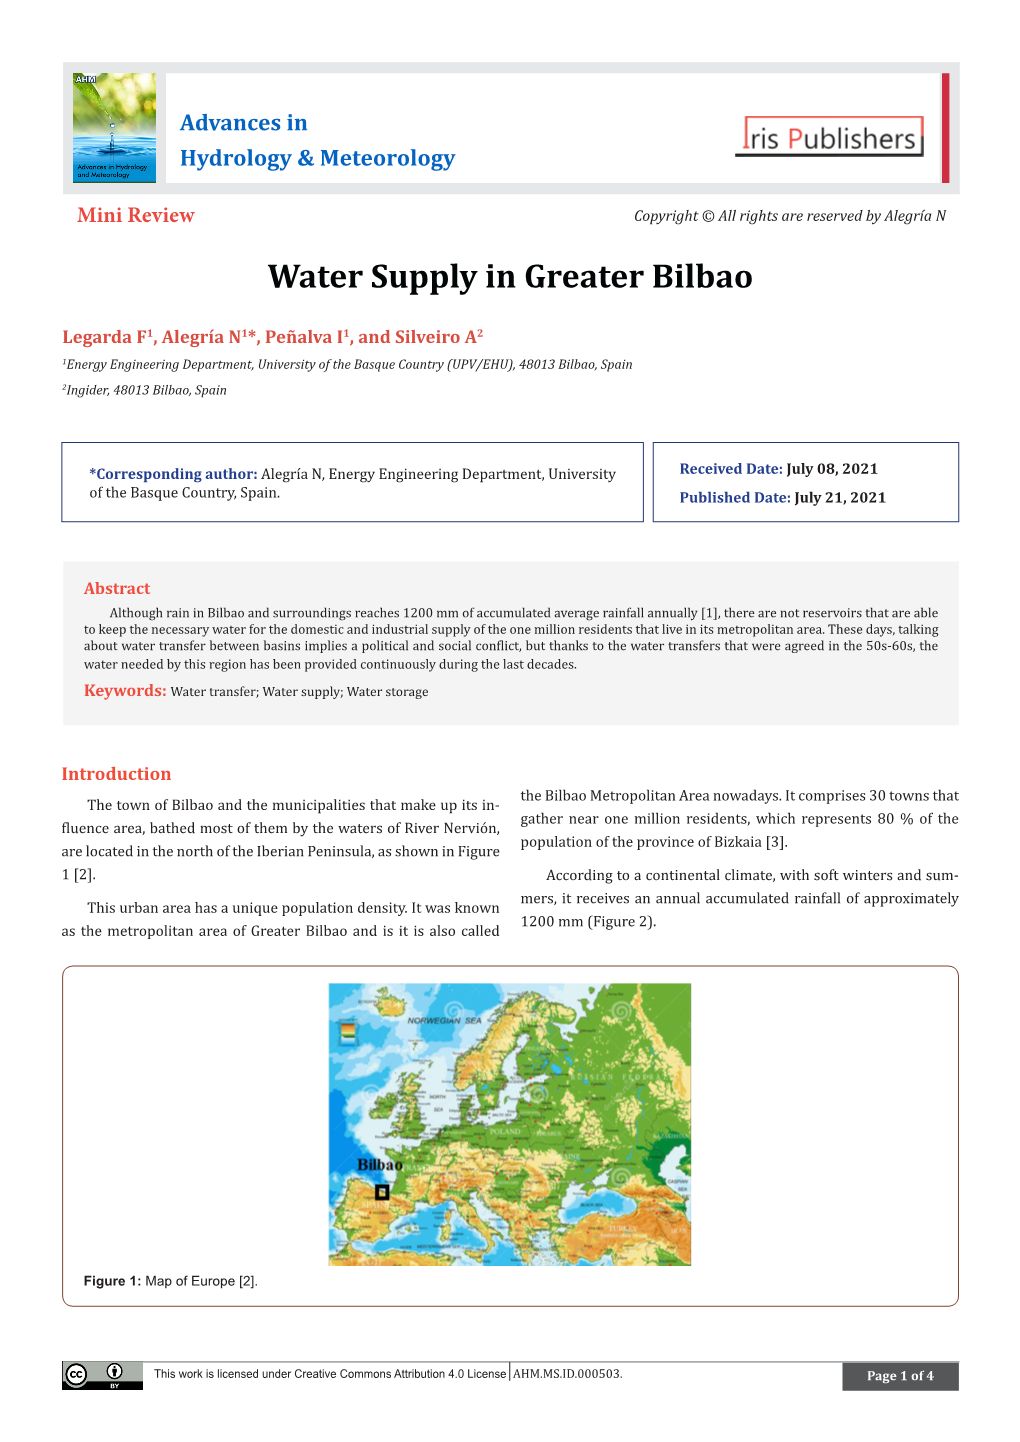 Water Supply in Greater Bilbao